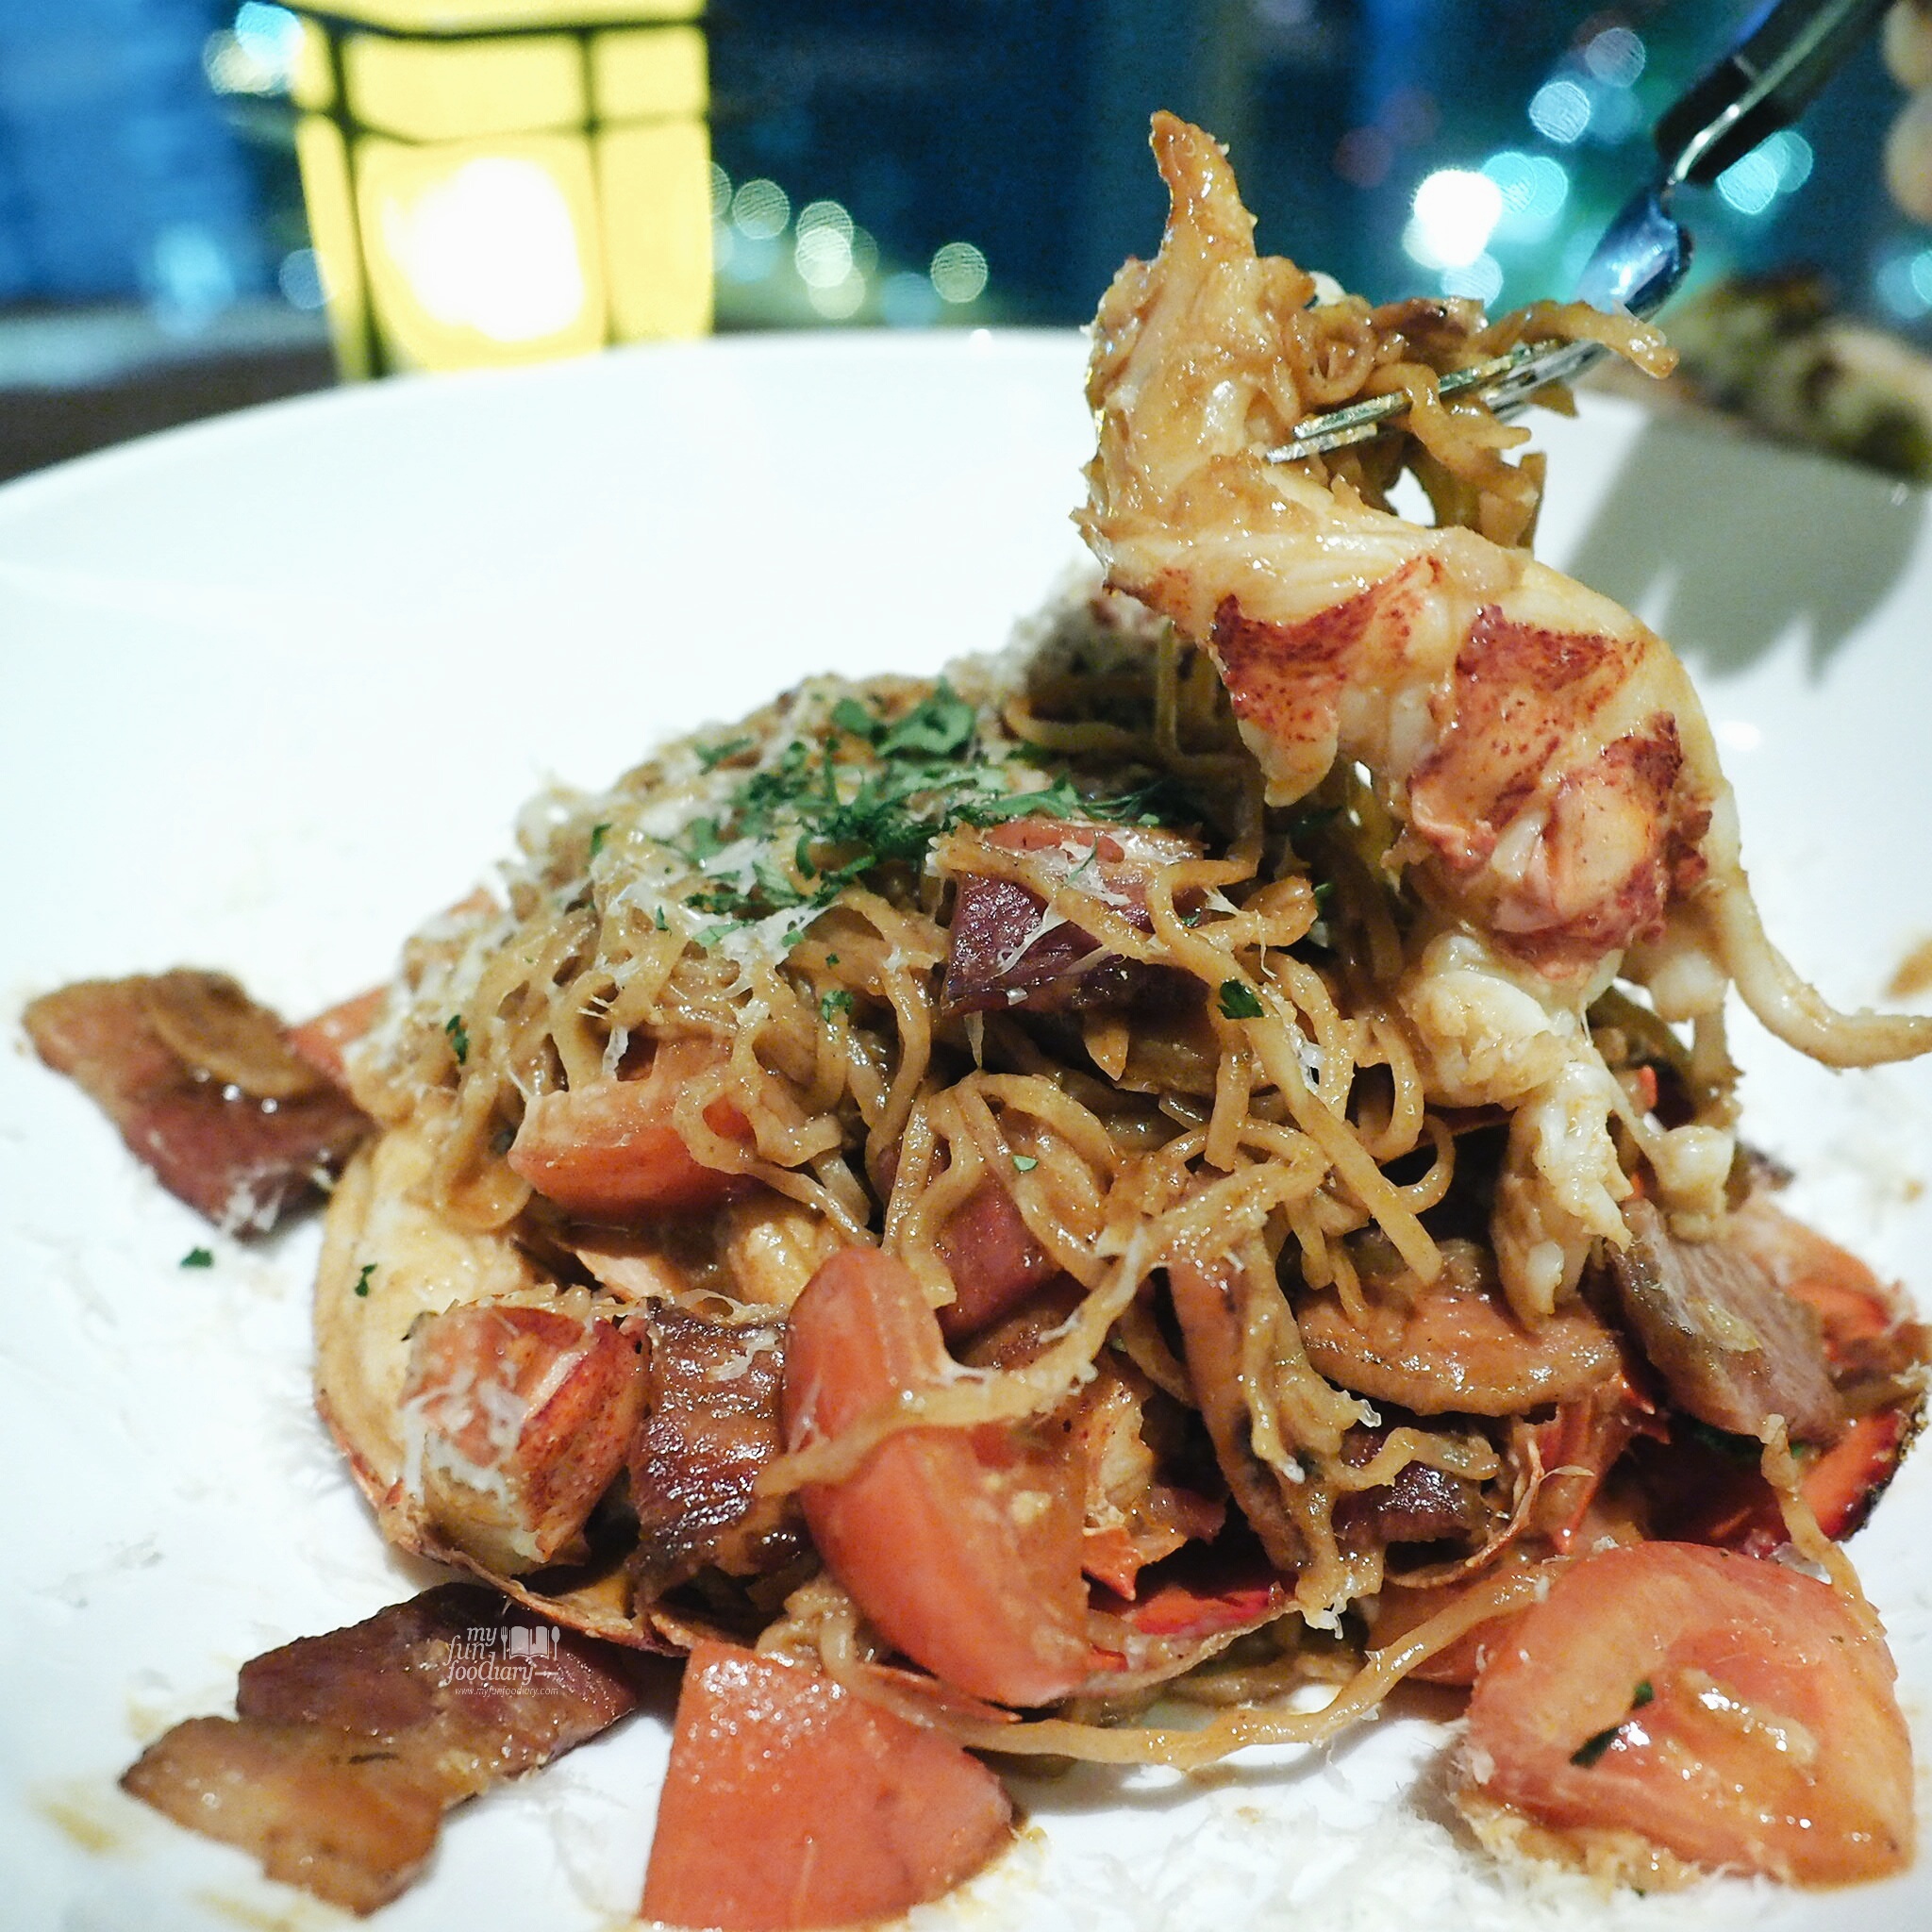 Lobster Spaghetti at Cook and Brew Westin Singapore by Myfunfoodiary